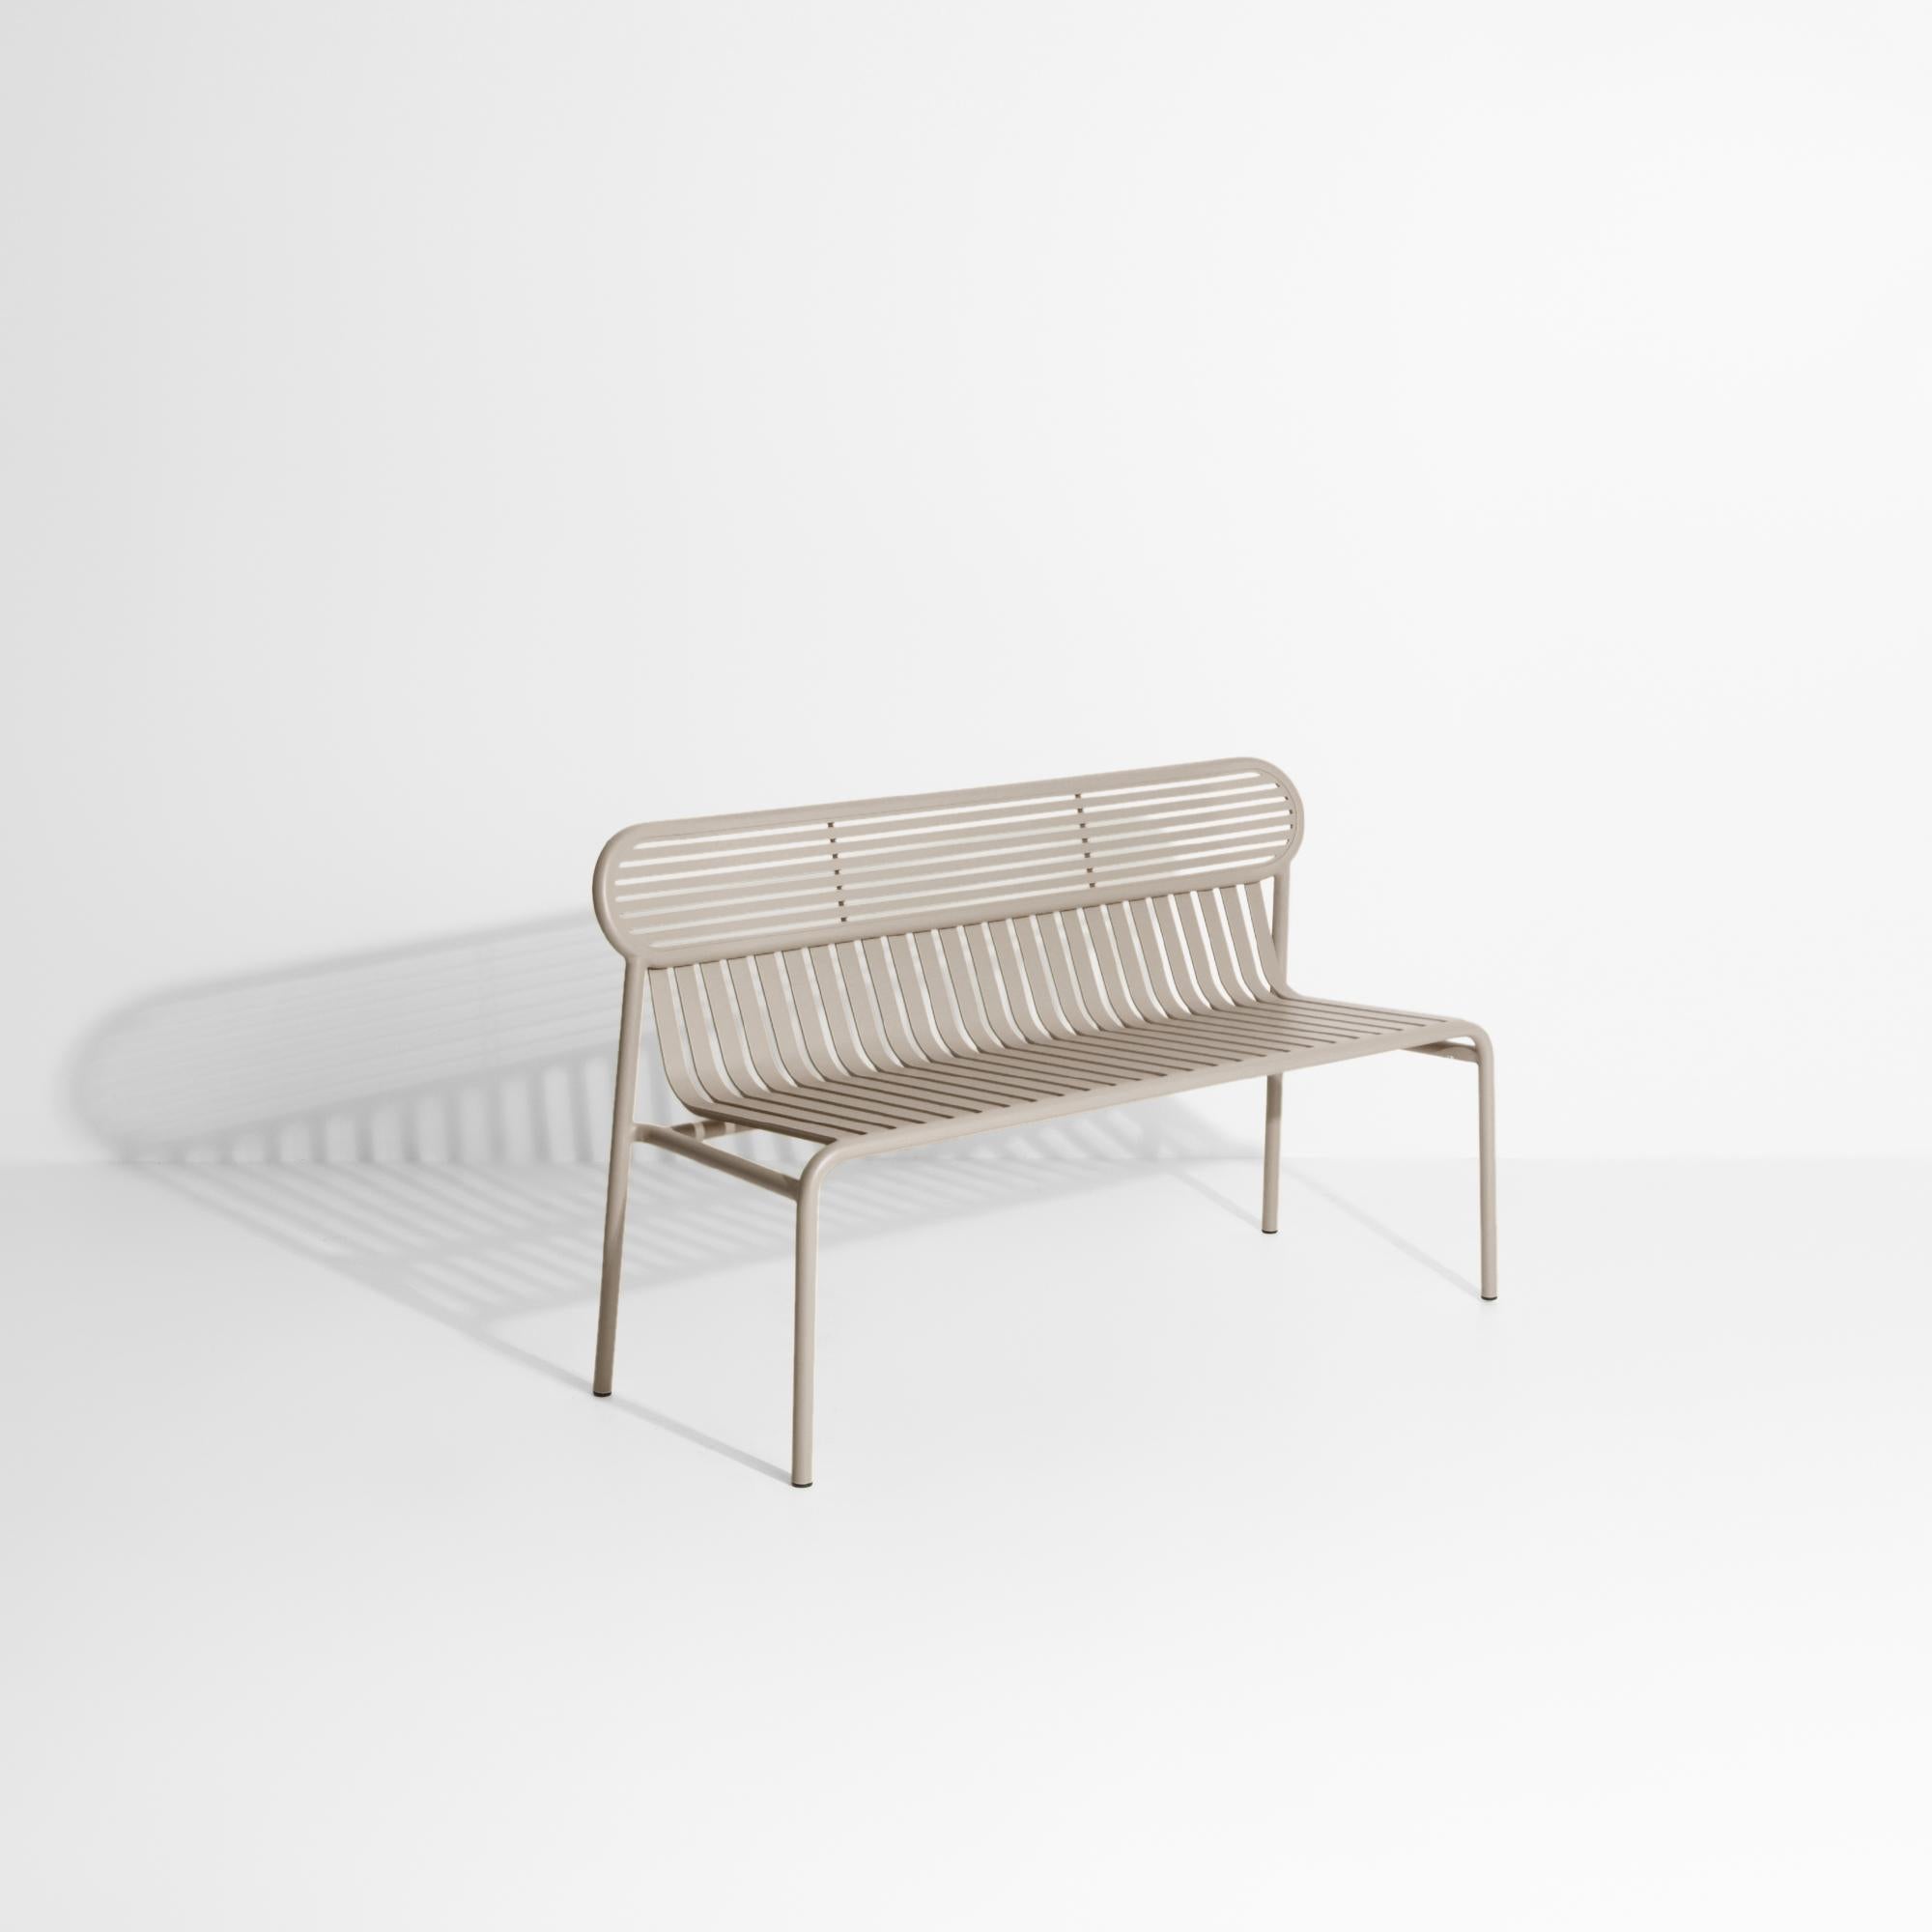 Petite Friture Week-End Bench in Dune Aluminium by Studio BrichetZiegler In New Condition For Sale In Brooklyn, NY